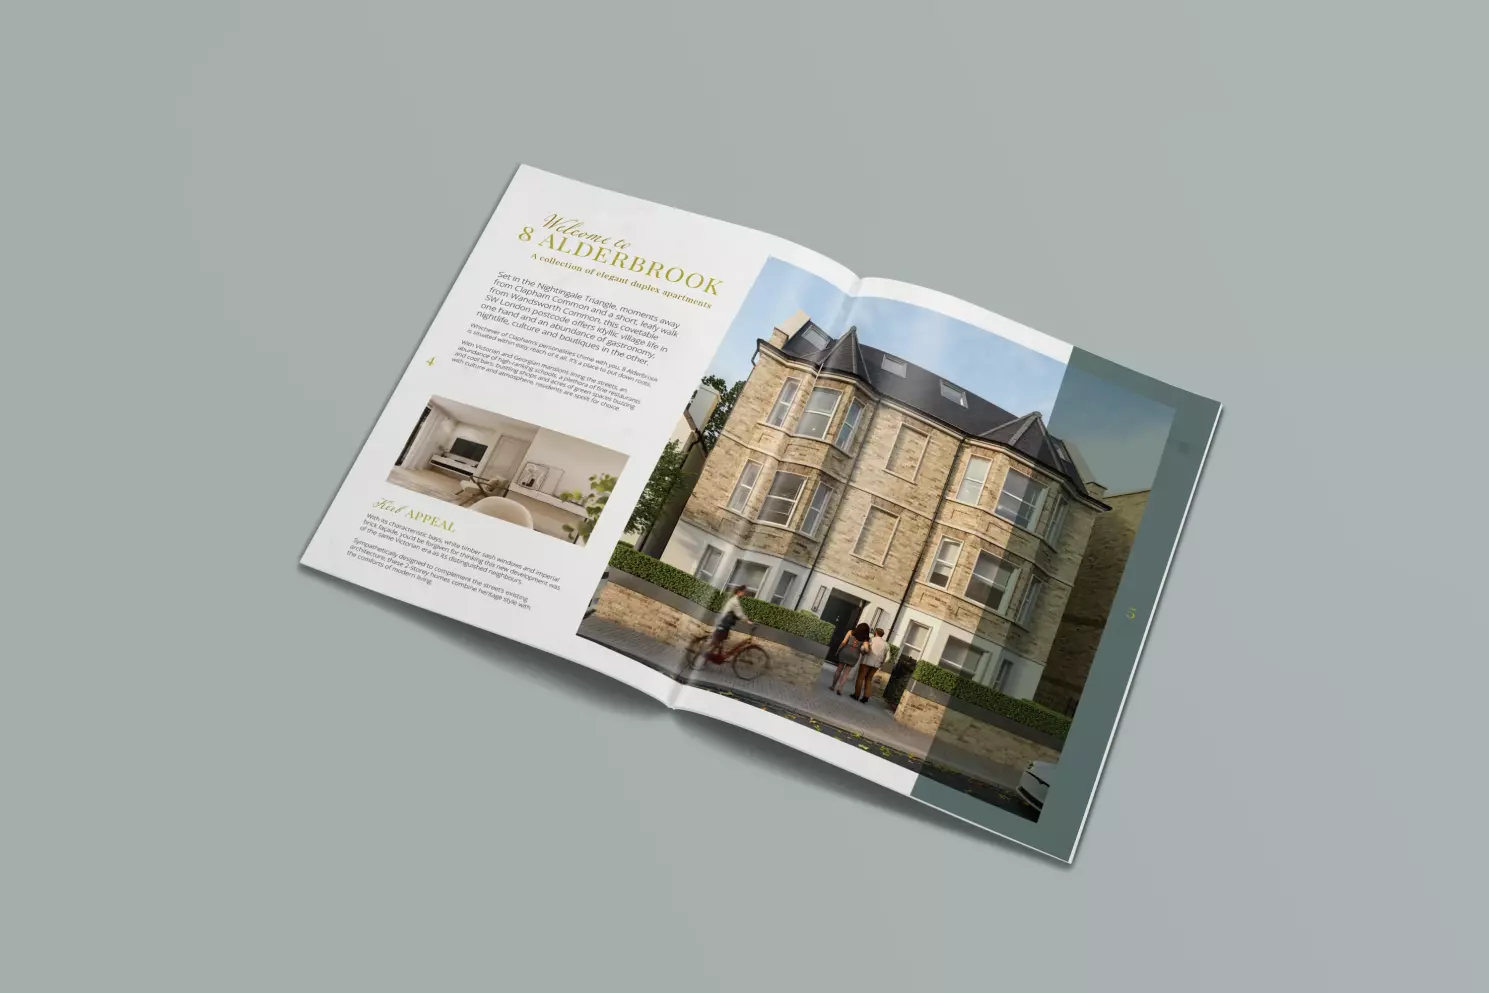 A mock up of a double page spread of the Alderbrook Road property brochure showing a CGI image of the outside of the property